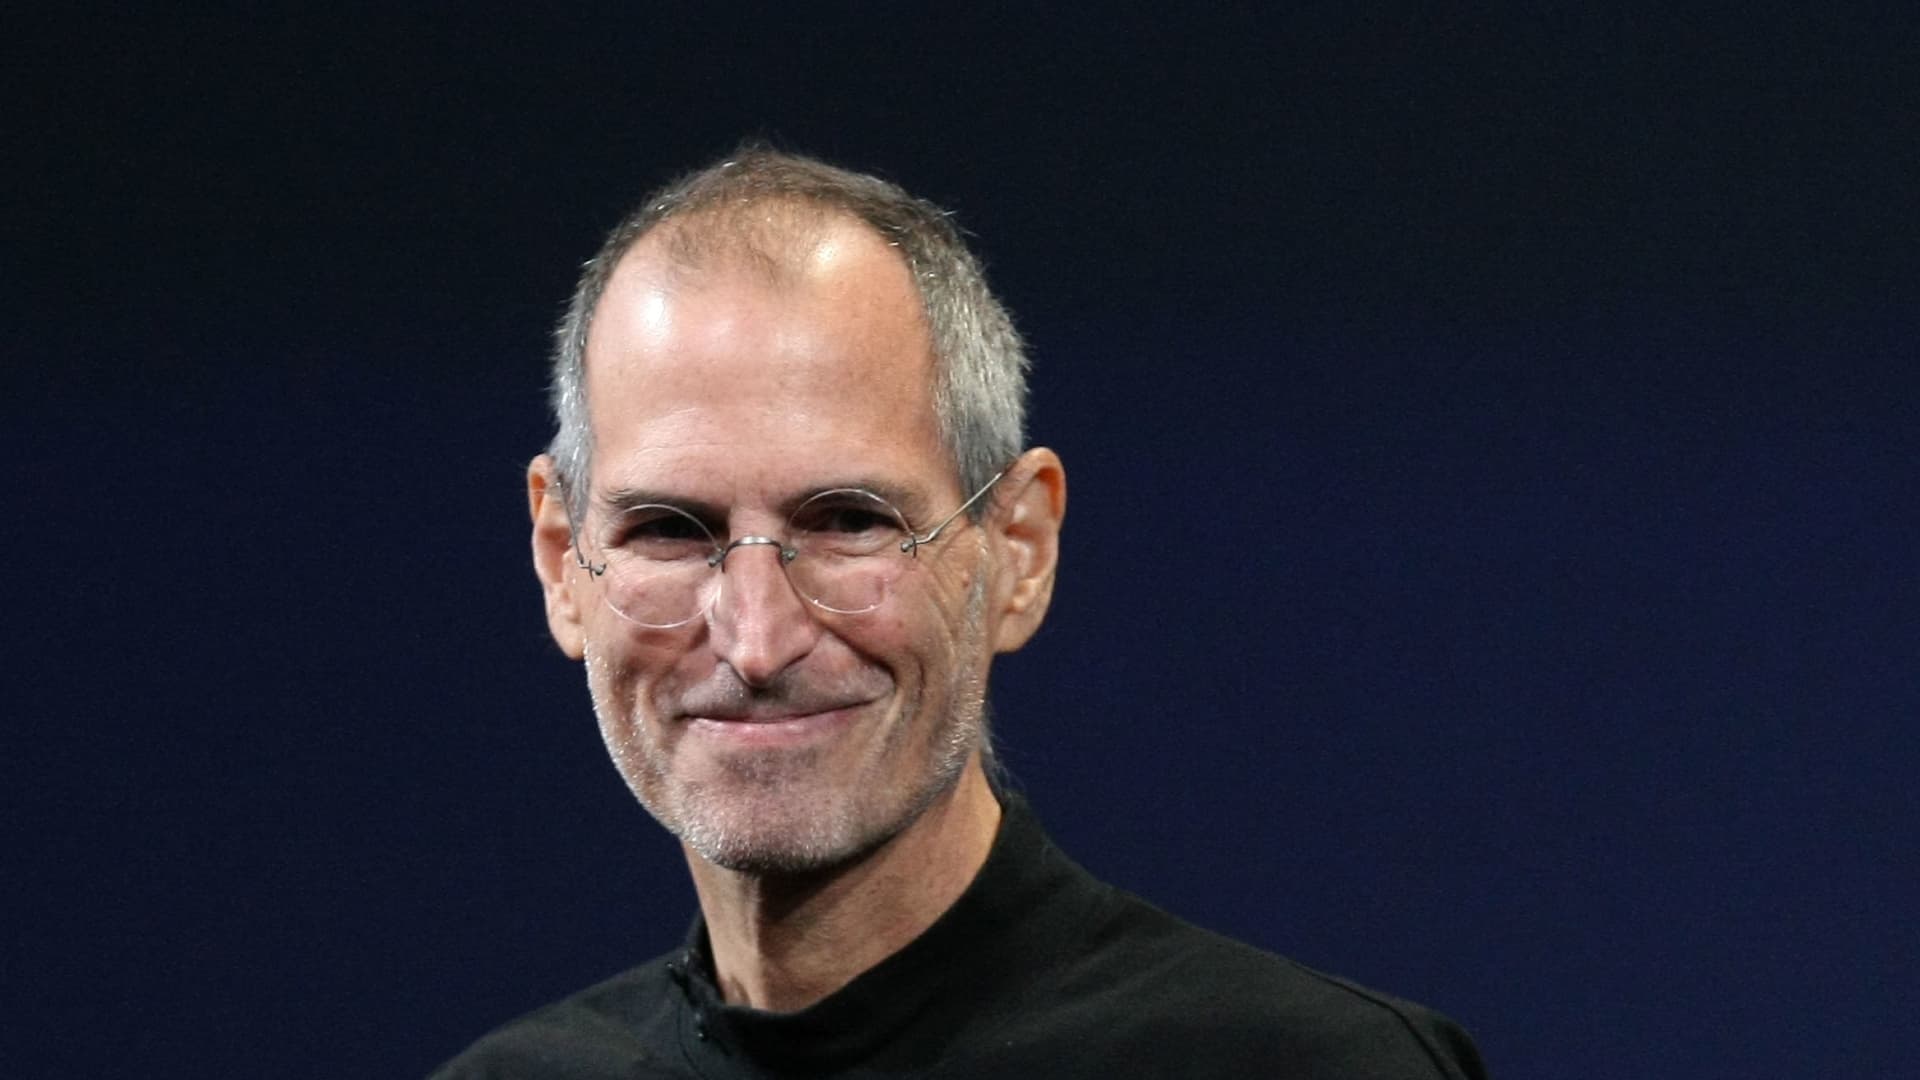 Steve Jobs Opens Up About Family and Regrets in His Last Days: A Personal Side of Apple's Visionary